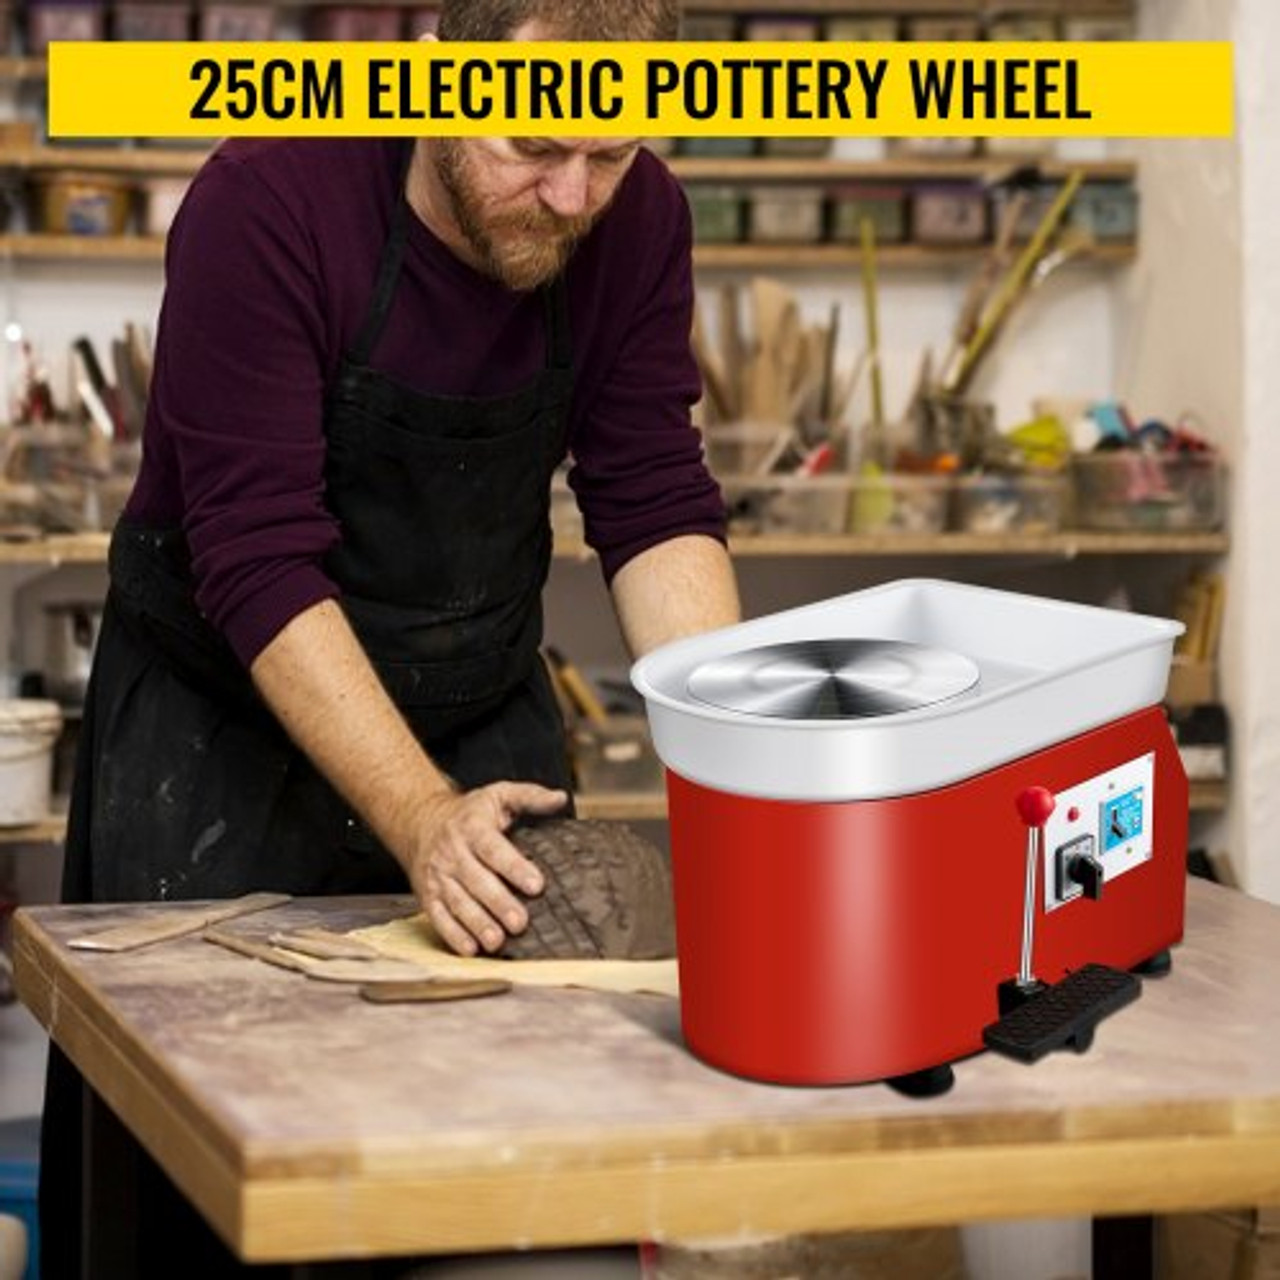 Pottery Wheel 25cm Pottery Forming Machine 250W Electric Pottery Wheel with Adjustable Feet Lever Pedal DIY Clay Tool with Tray for Ceramic Work Clay Art DIY Clay